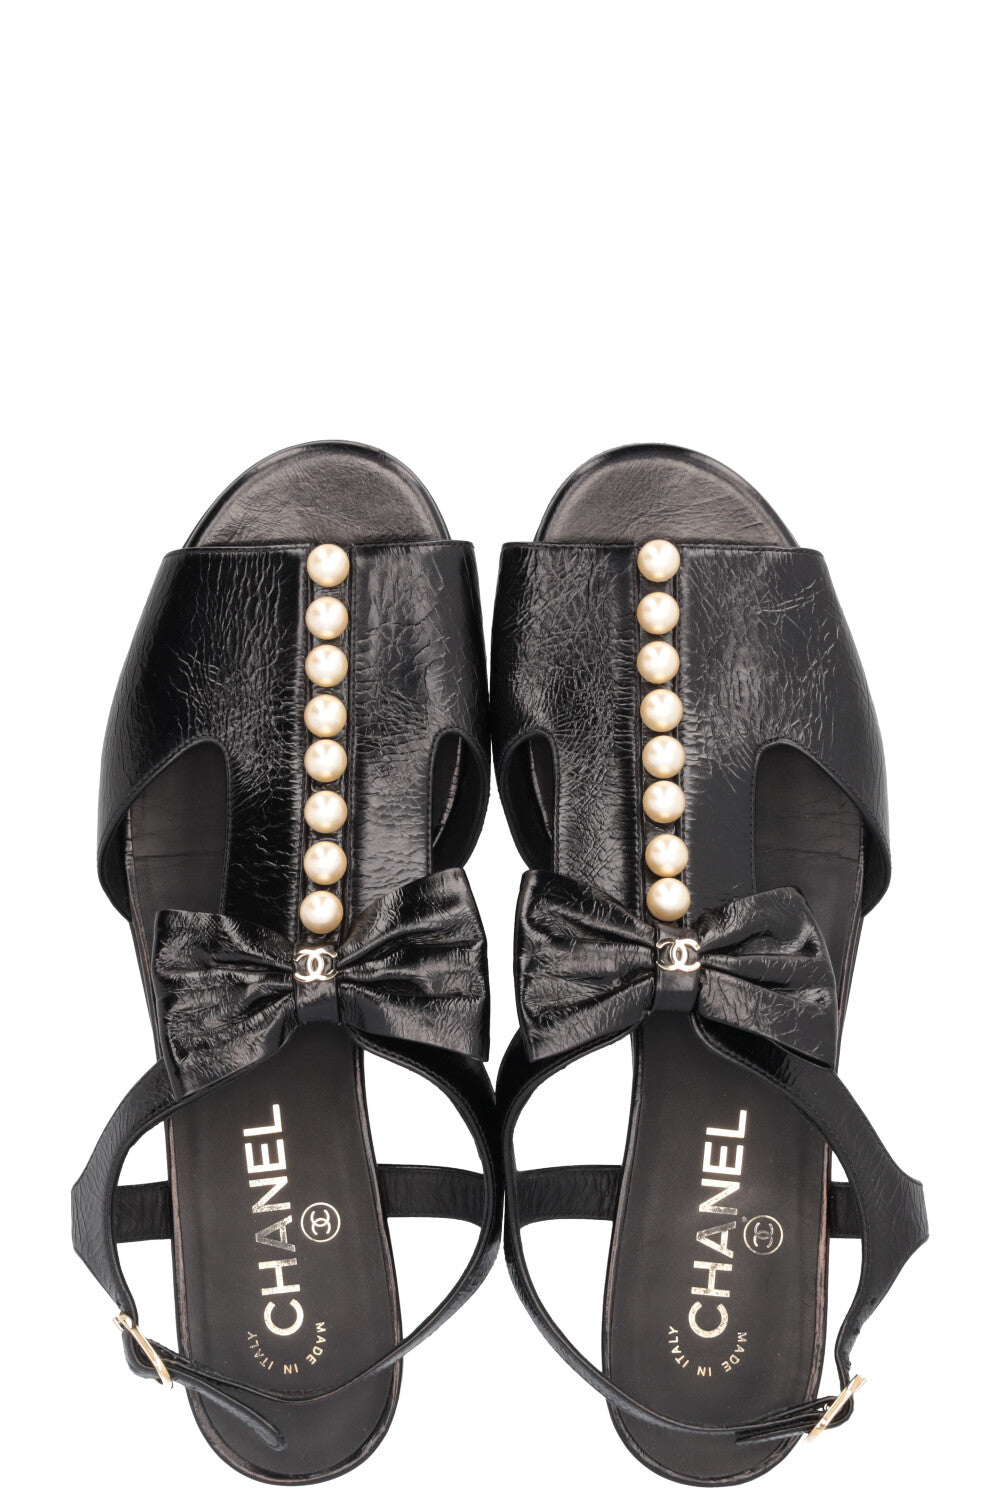 CHANEL Pearl Embellished Bow Sandals Black Patent